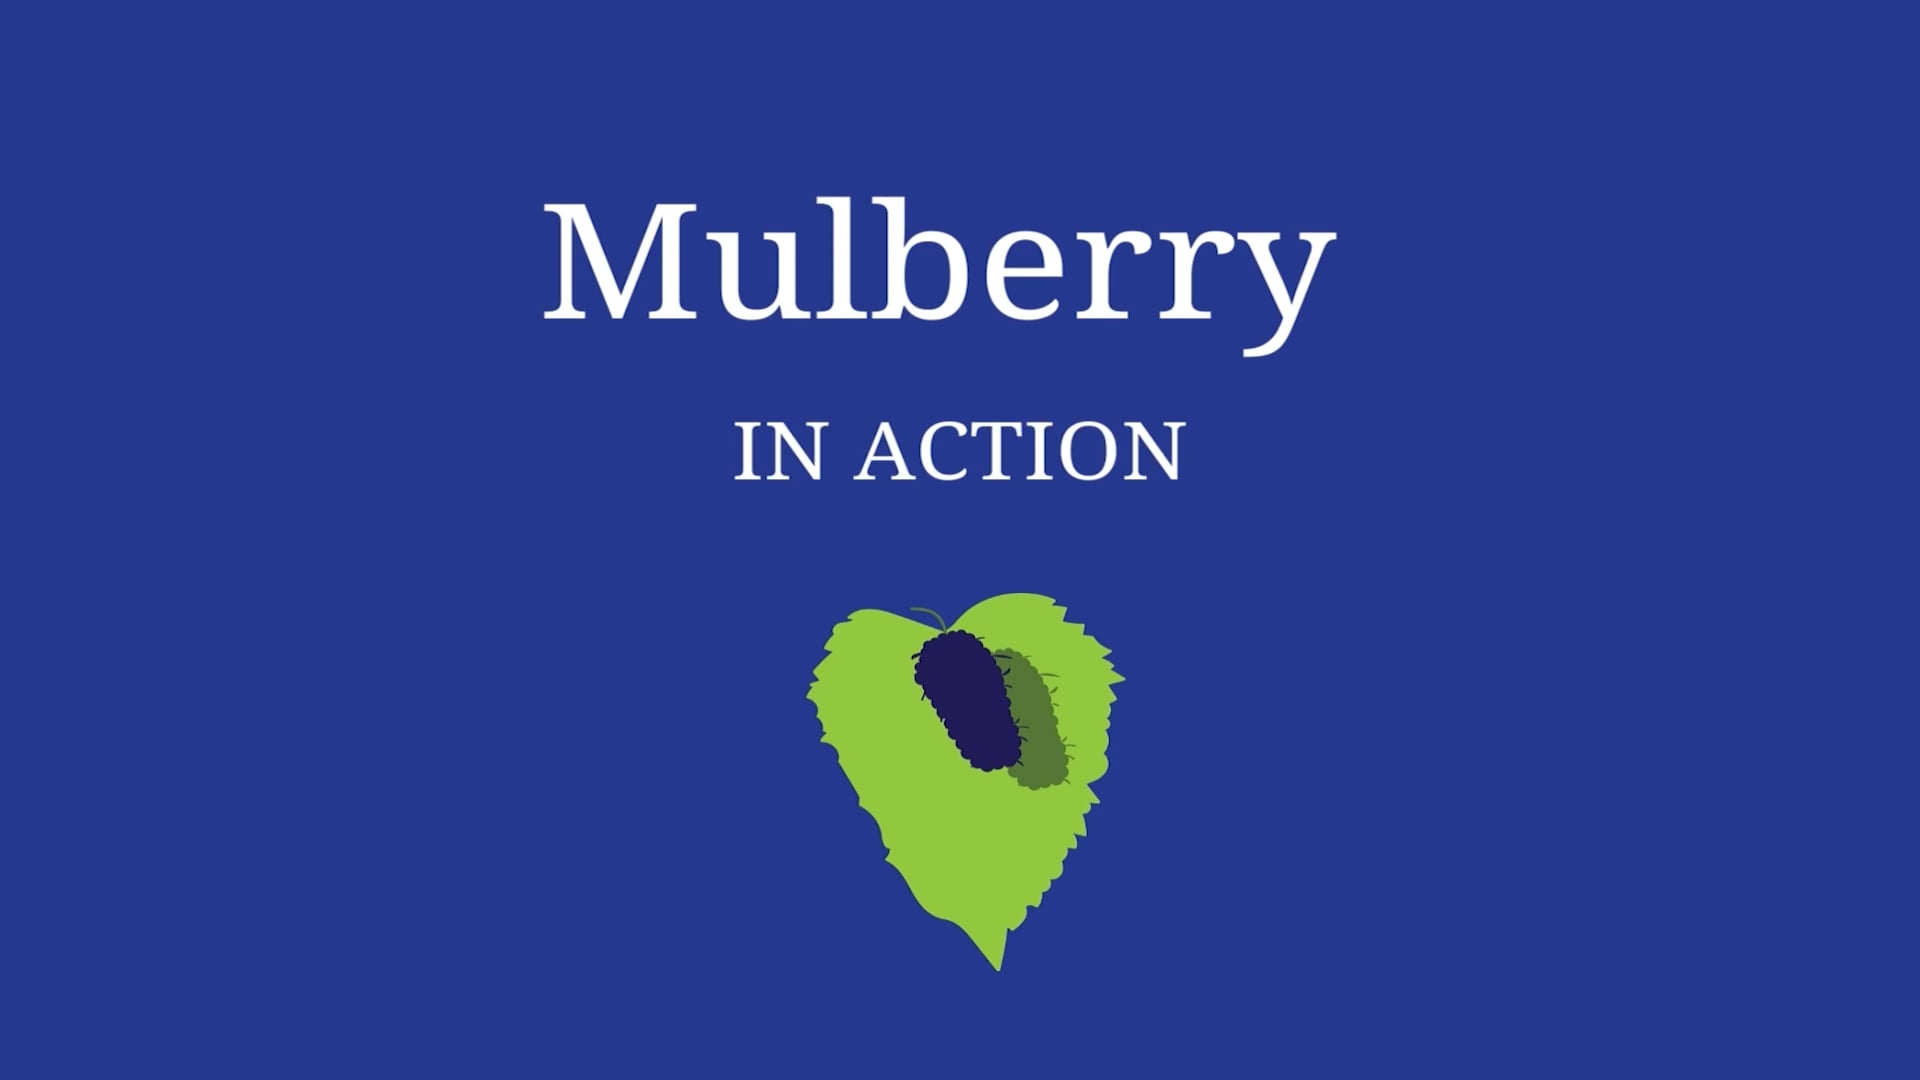 Mulberry in Action